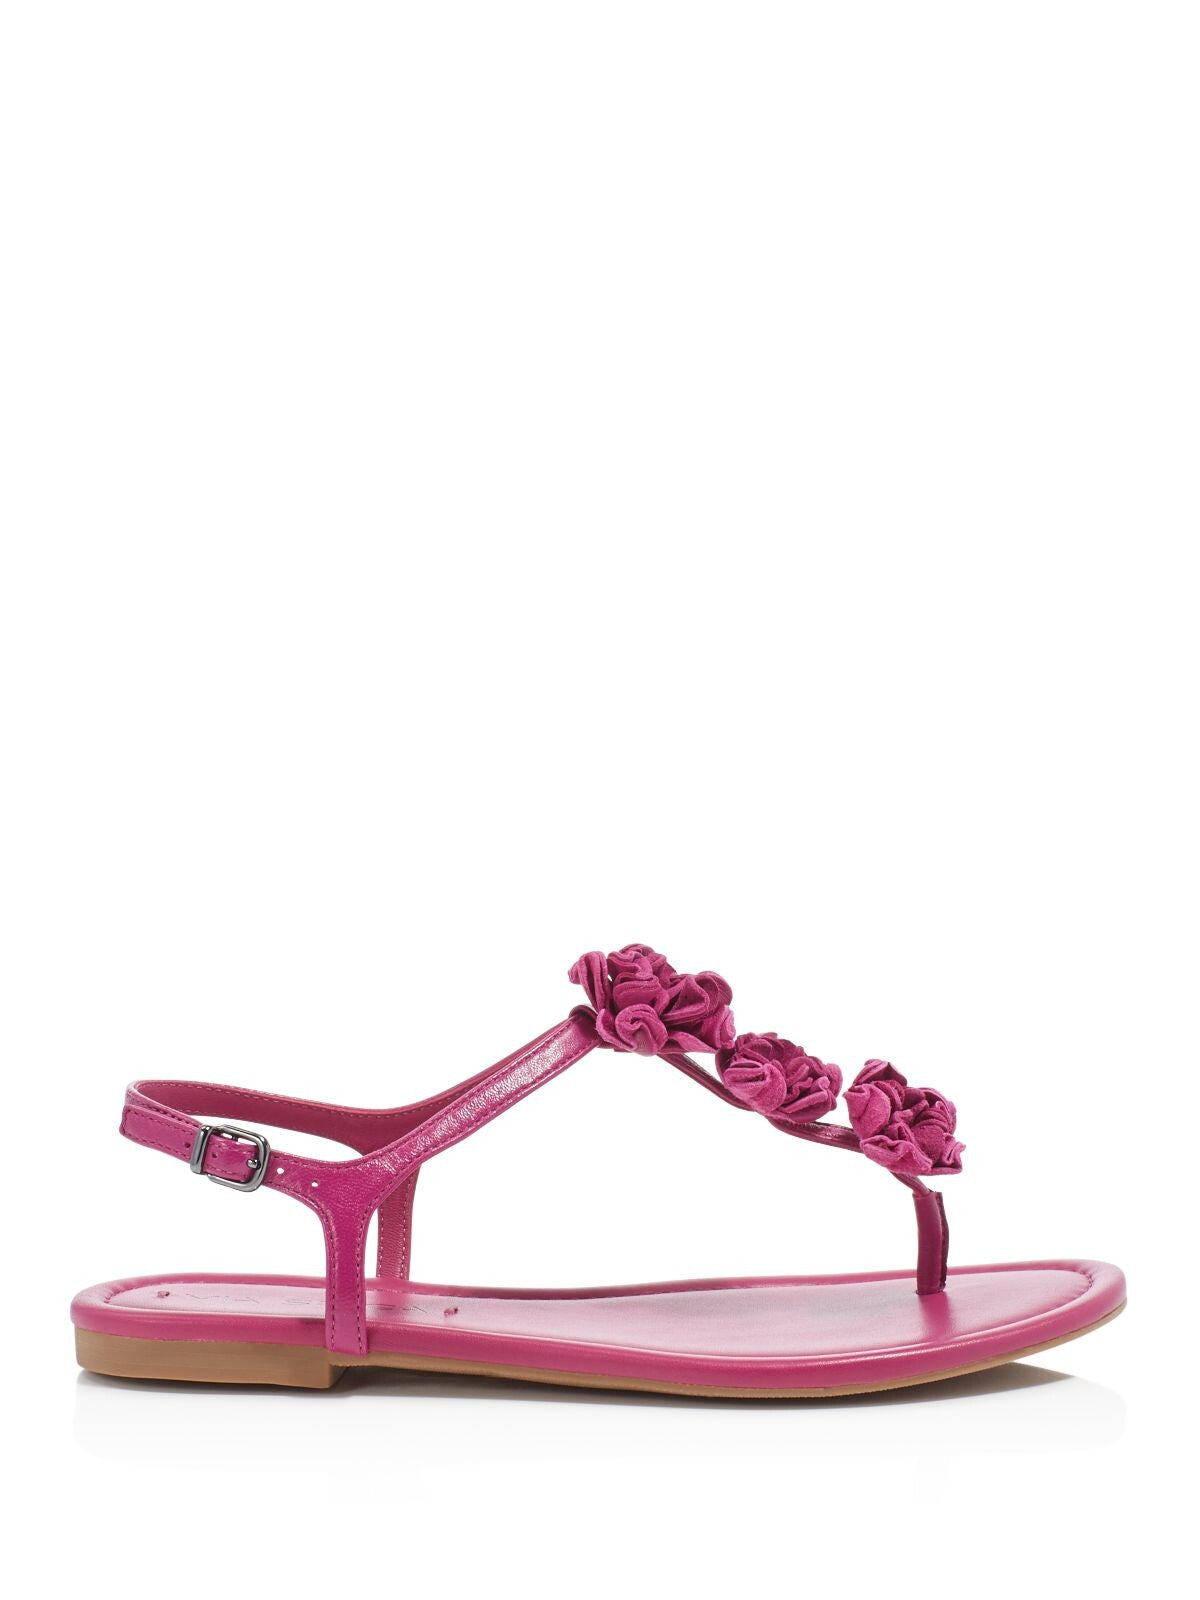 VIA SPIGA Womens Pink Floral Accent T-Strap Comfort Lola Round Toe Buckle Leather Thong Sandals Shoes 7.5 M